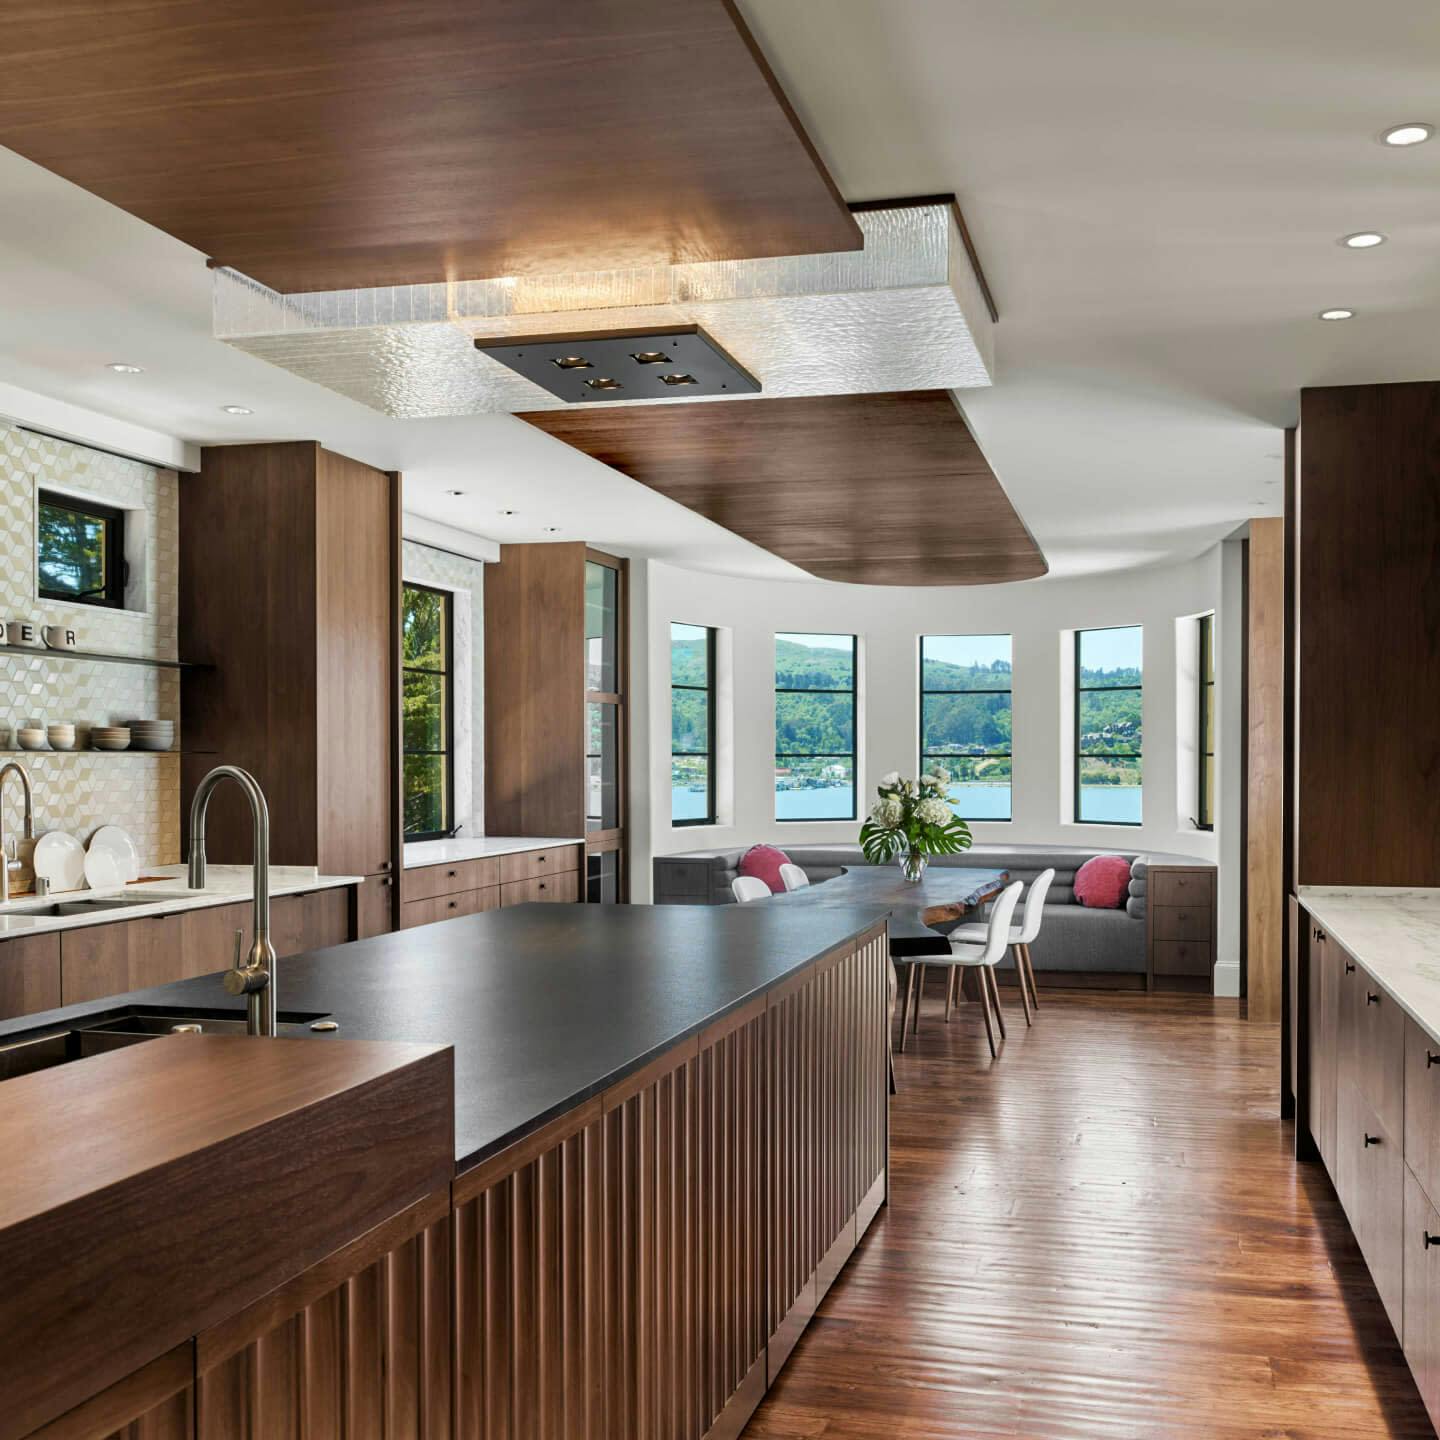 Photography of a home's kitchen and dining area with a view of a lake